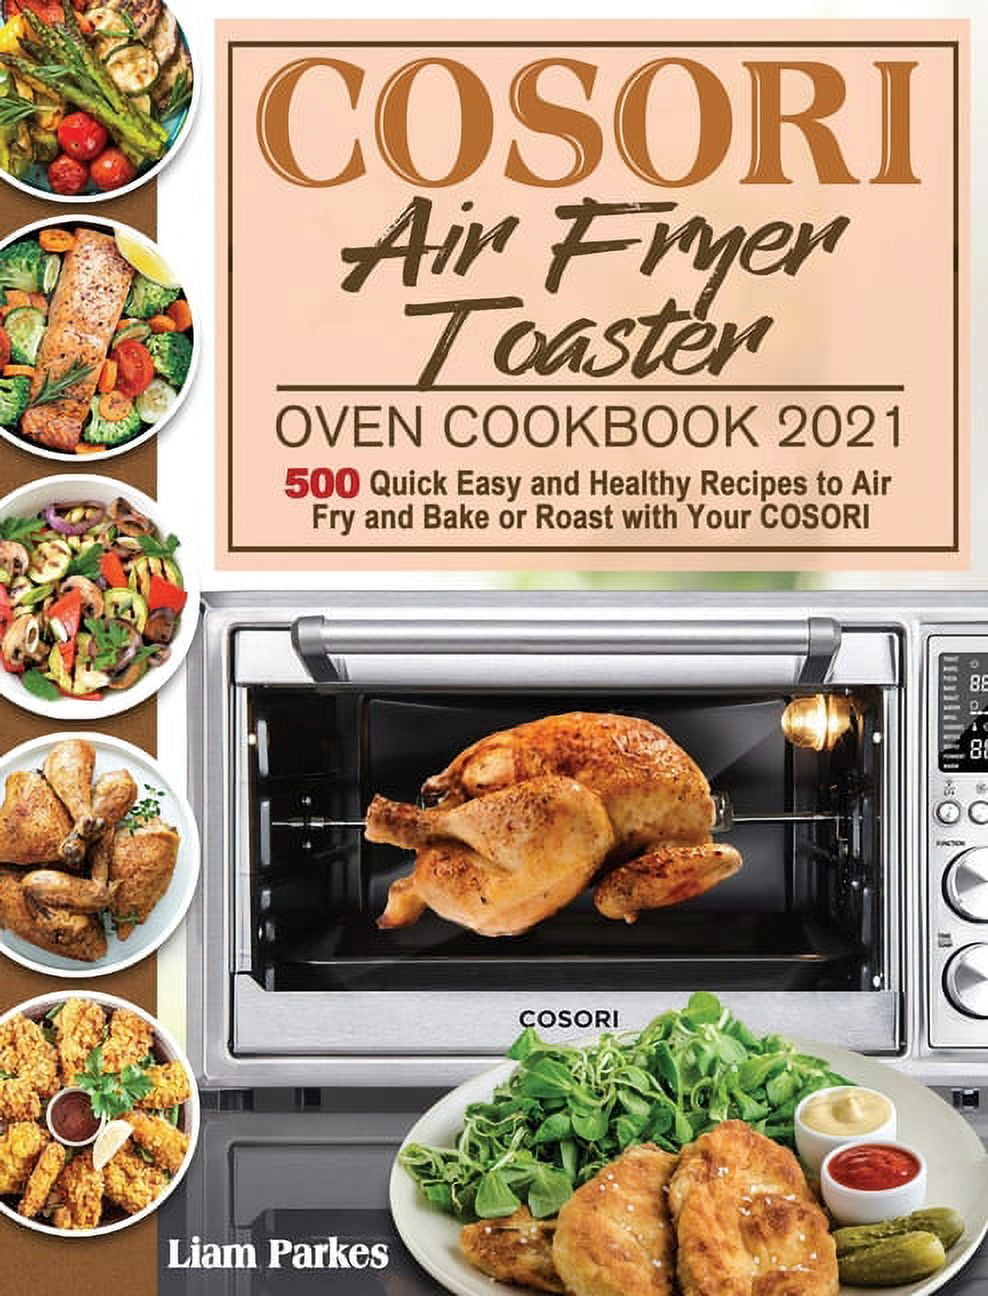 Cosori Air Fryer Cookbook: The Latest Most-Wanted Air Fryer Recipes that  Anyone can Cook at Home (Paperback)